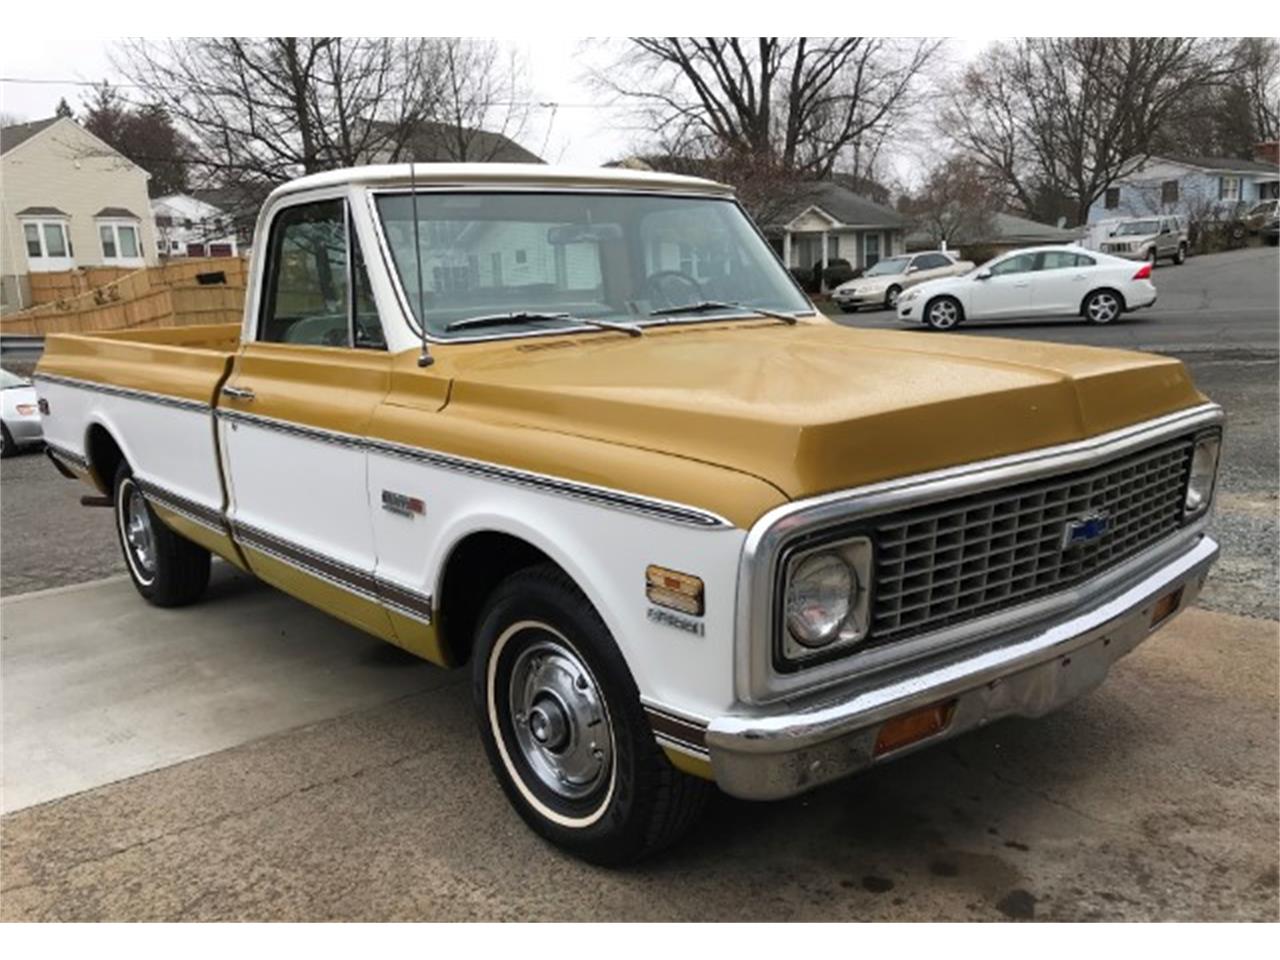 1971 Chevrolet Cheyenne for sale in Harpers Ferry, WV